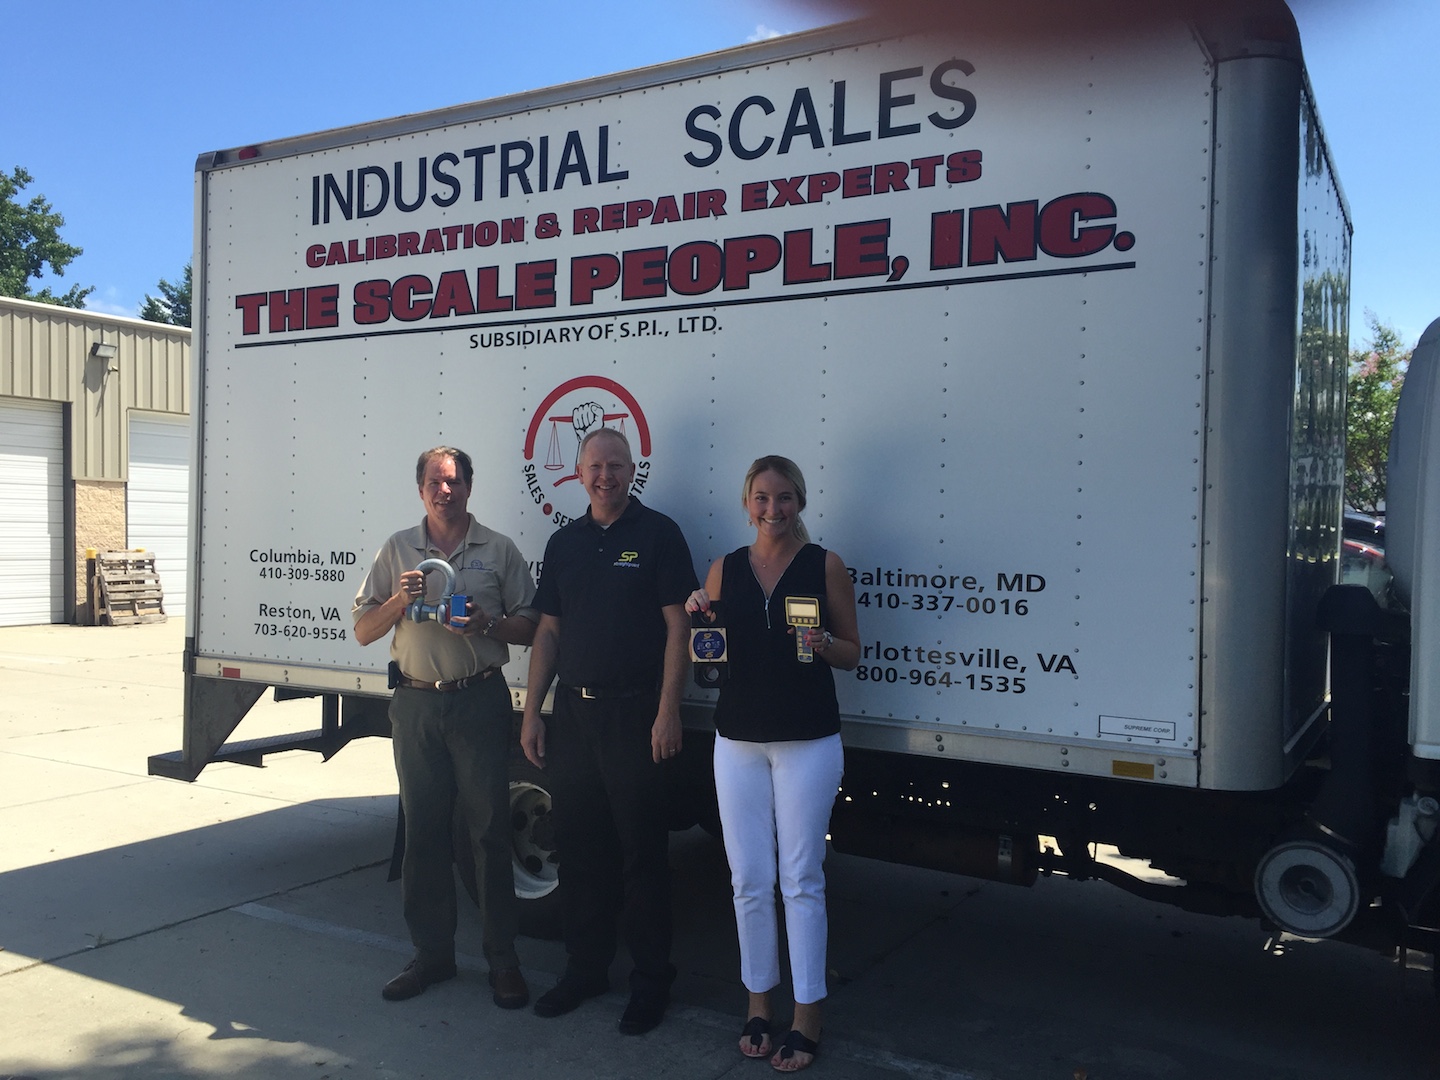 Straightpoint’s Wayne Wille with Craig Buck, president, and Virginia Thayer Smith, sales, The Scale People Inc.